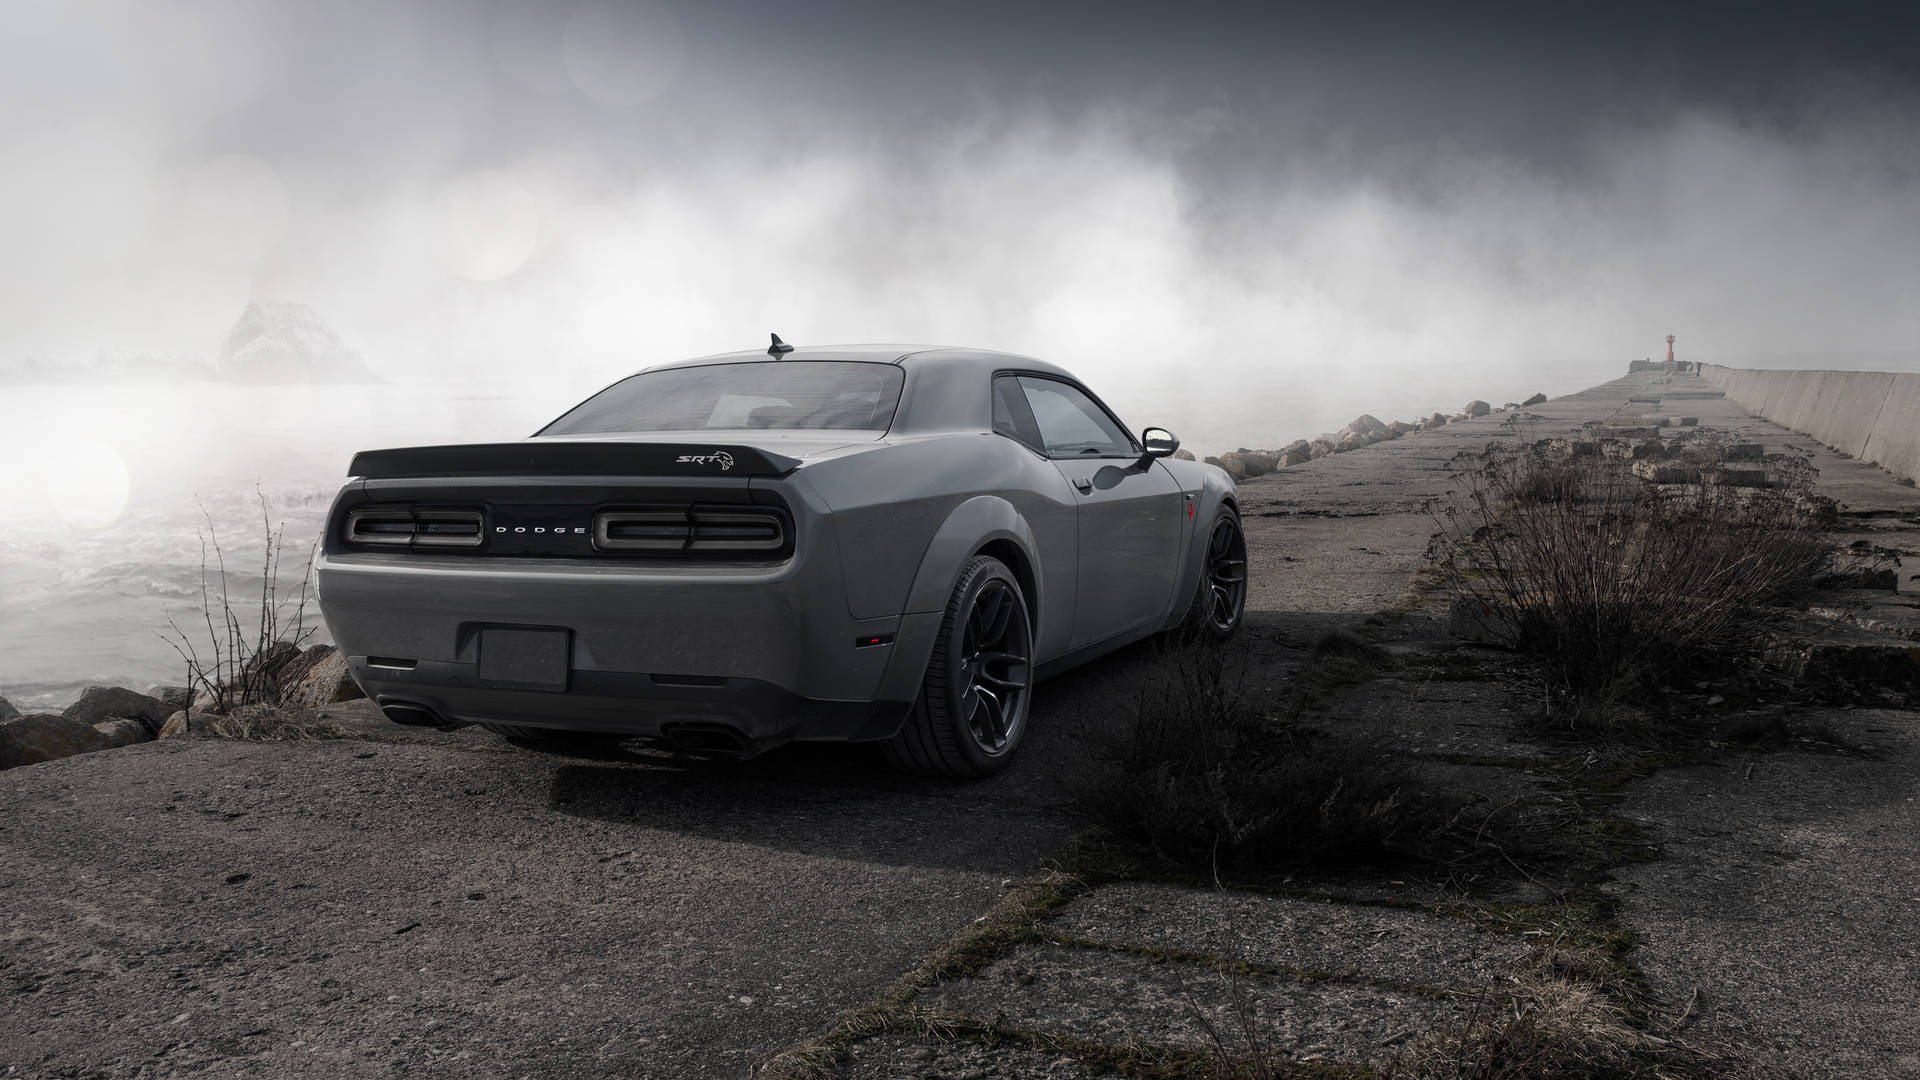 Dodge Discontinuing the Charger and Challenger – The Cat's Eye